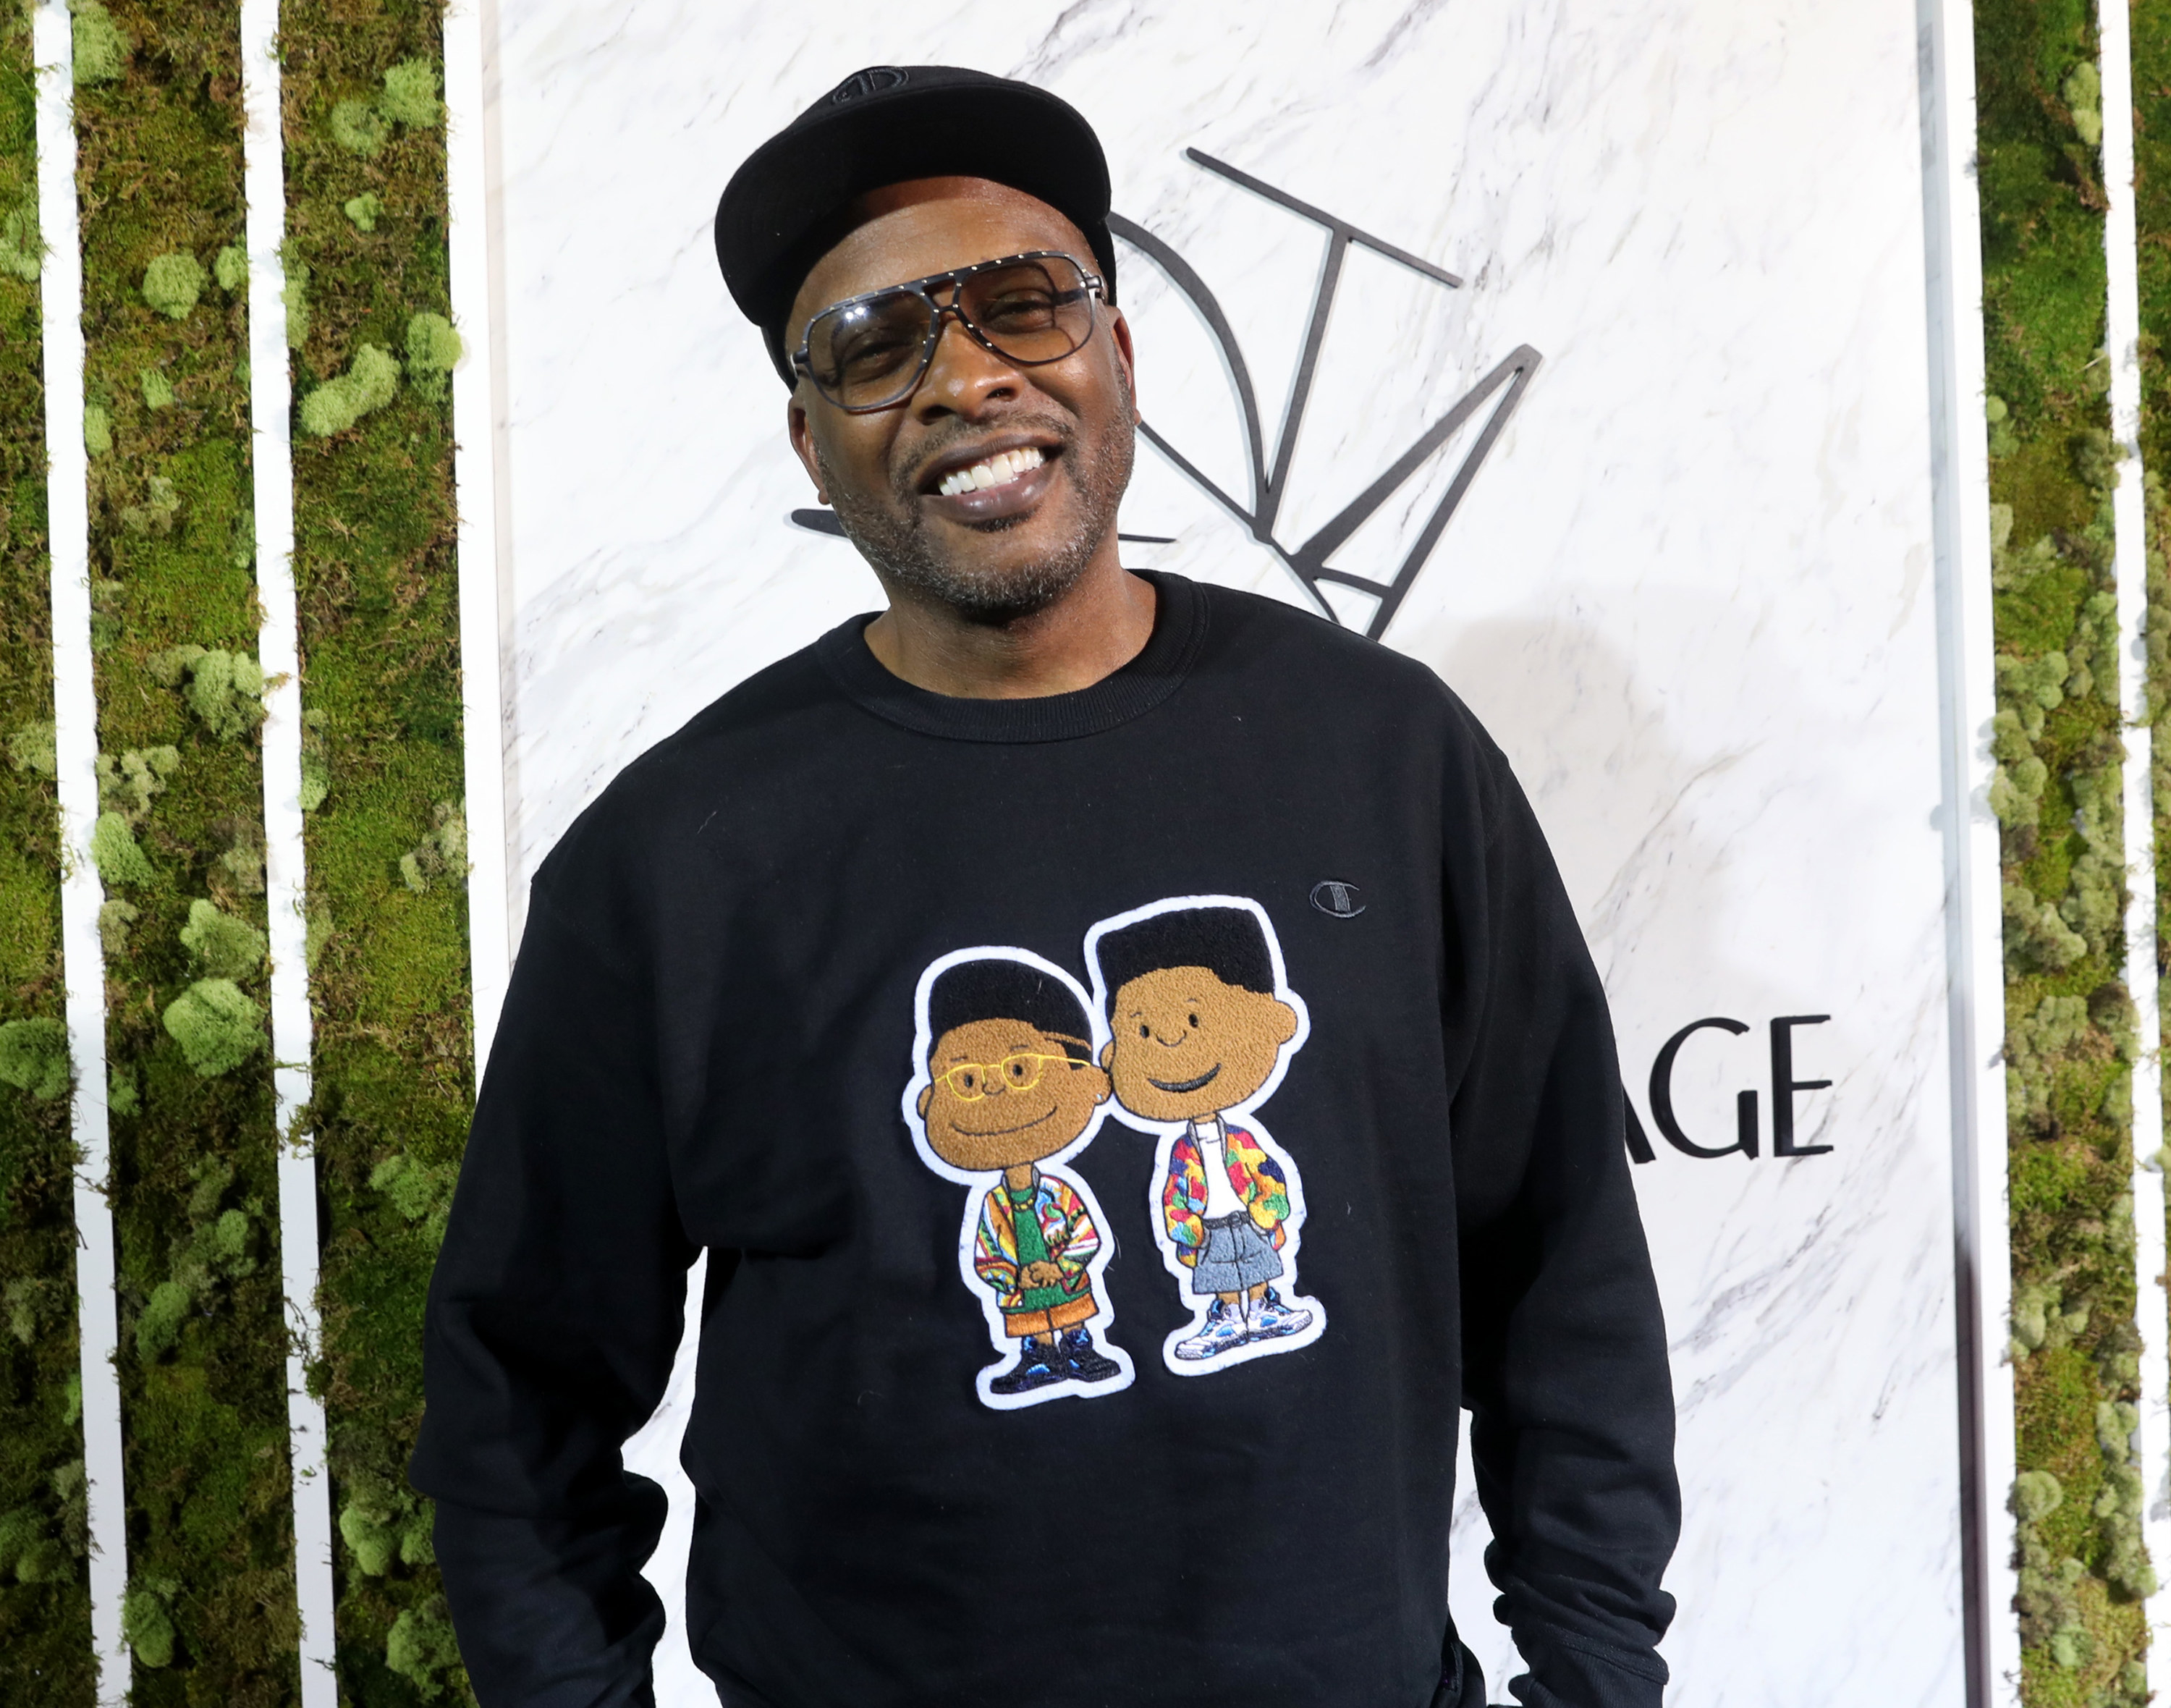 A smiling DJ Jazzy Jeff wearing a cap, glasses, and a sweatshirt